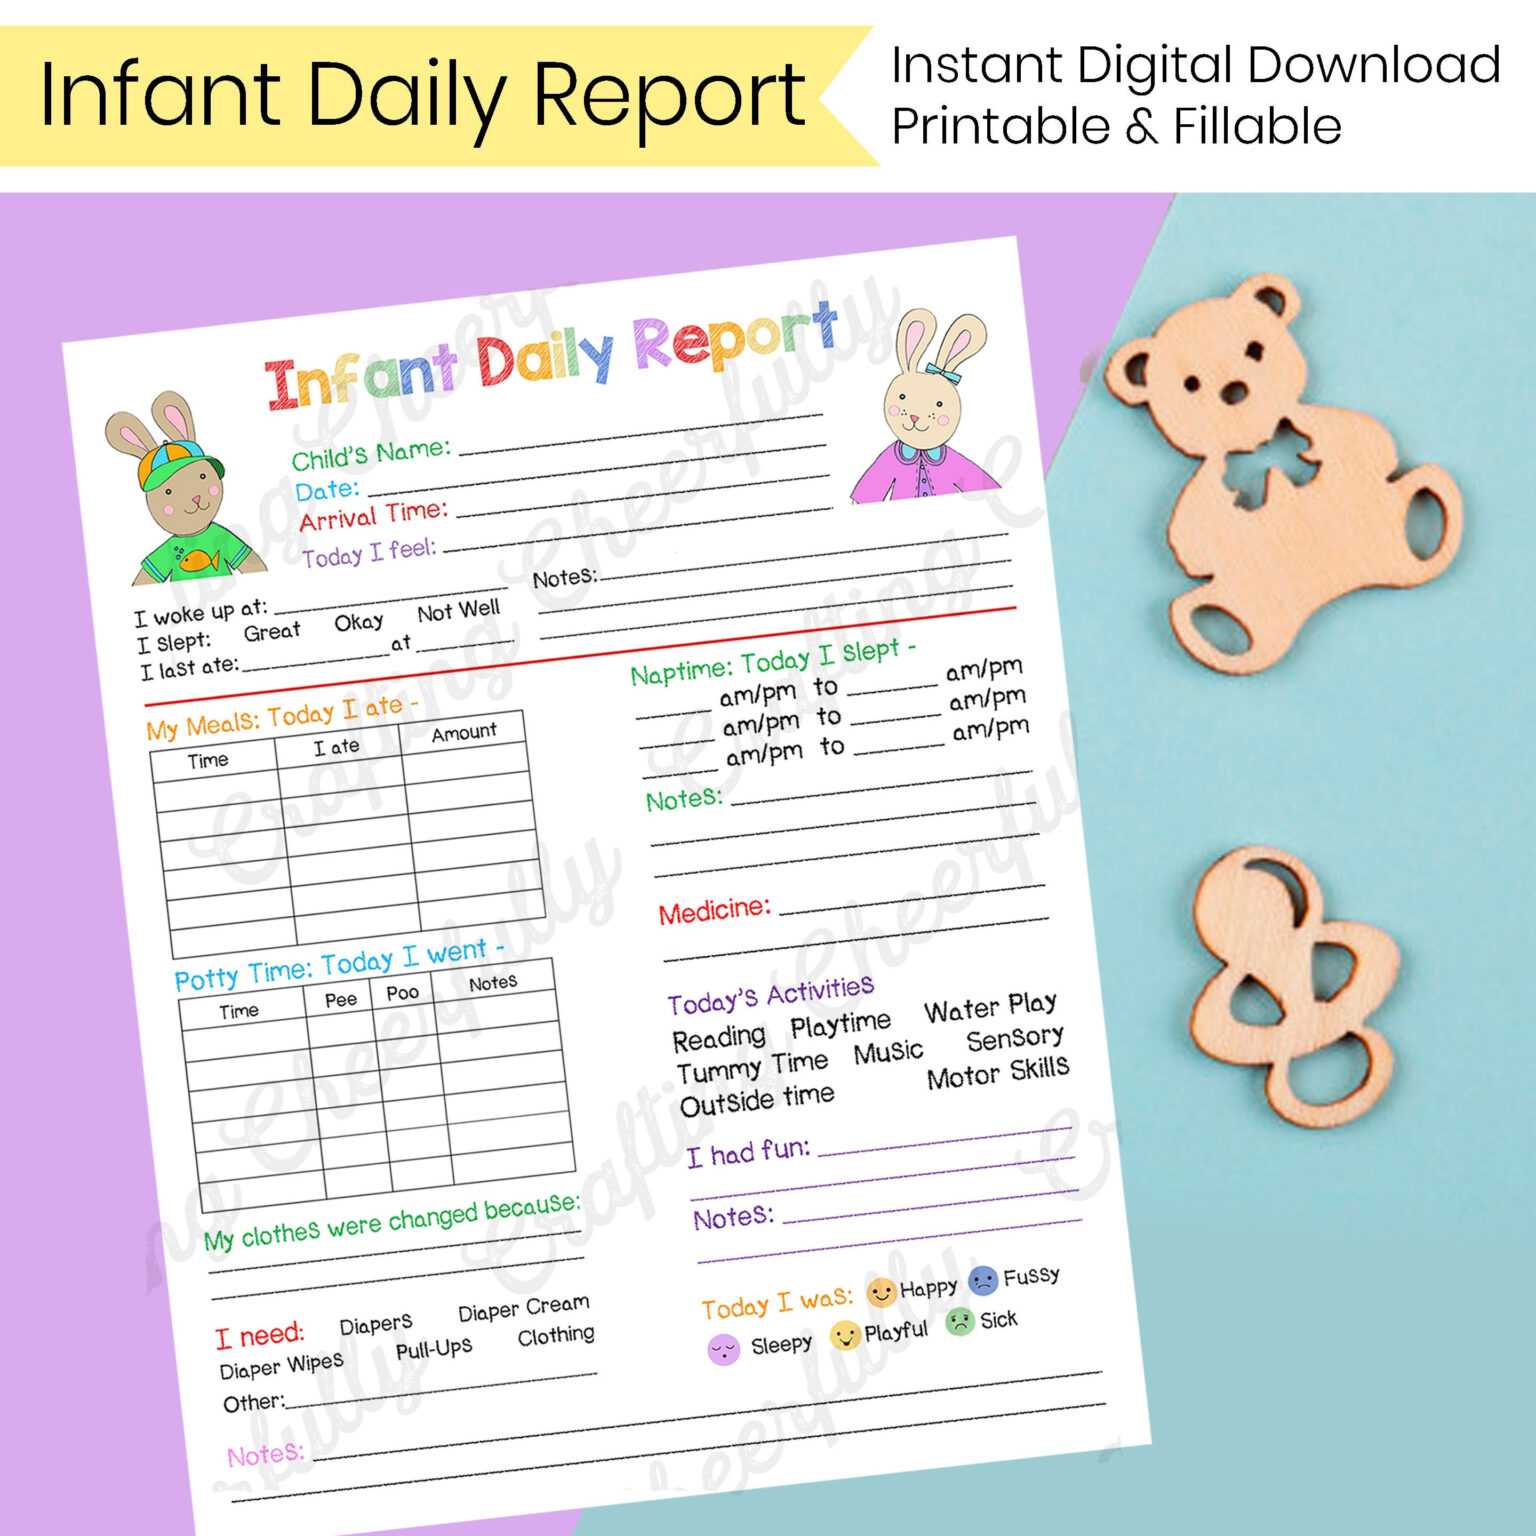 daycare-infant-daily-report-template-best-creative-templates